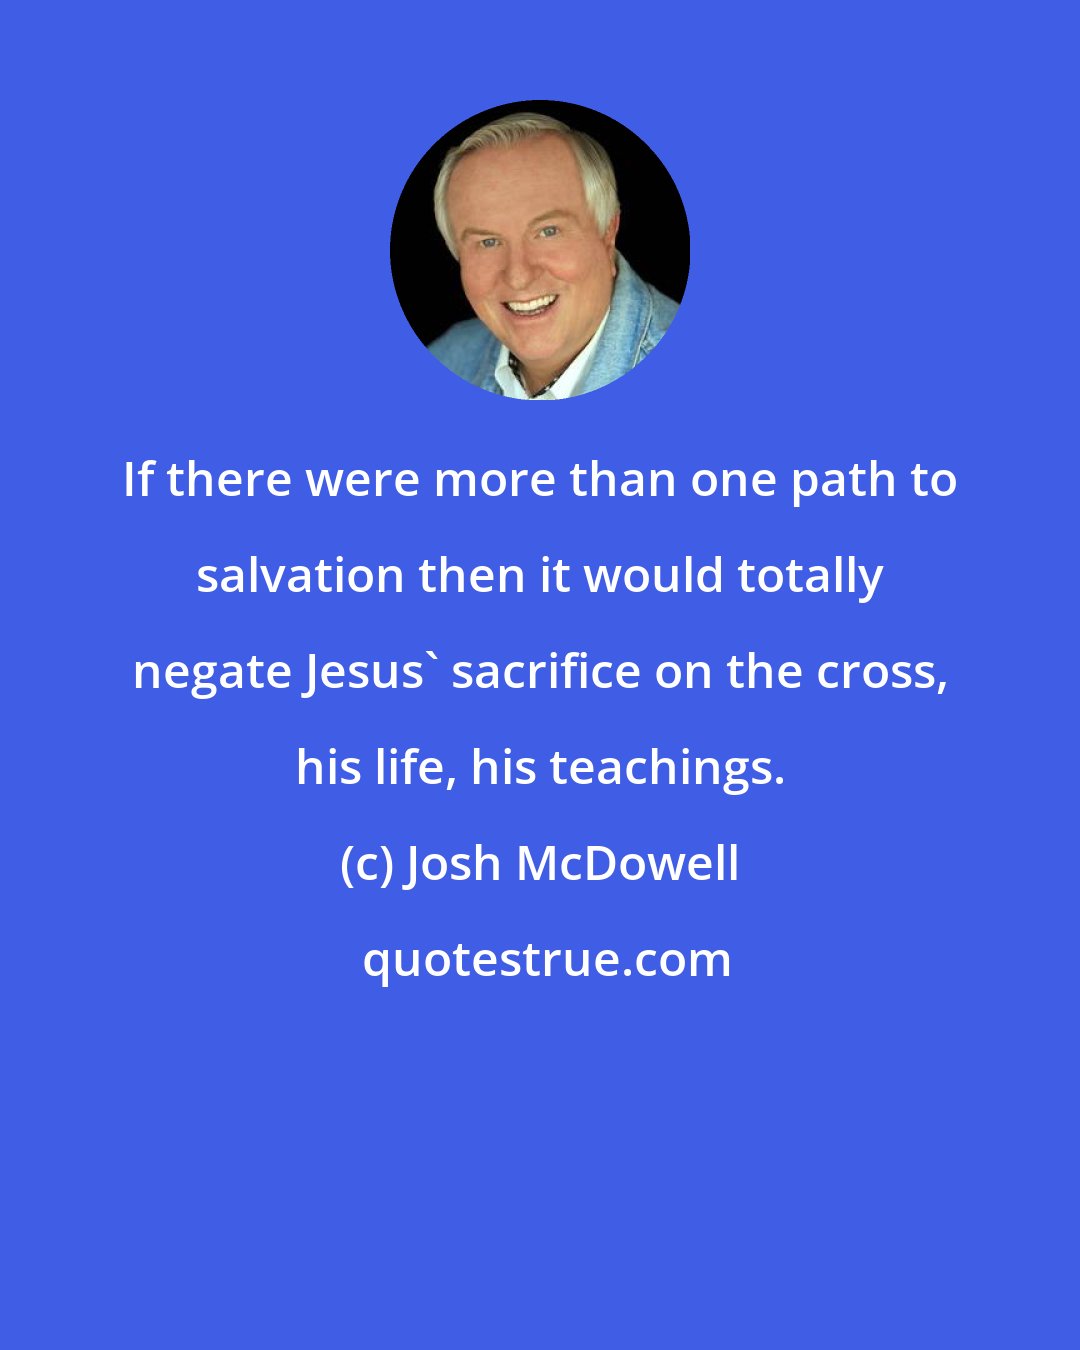 Josh McDowell: If there were more than one path to salvation then it would totally negate Jesus' sacrifice on the cross, his life, his teachings.